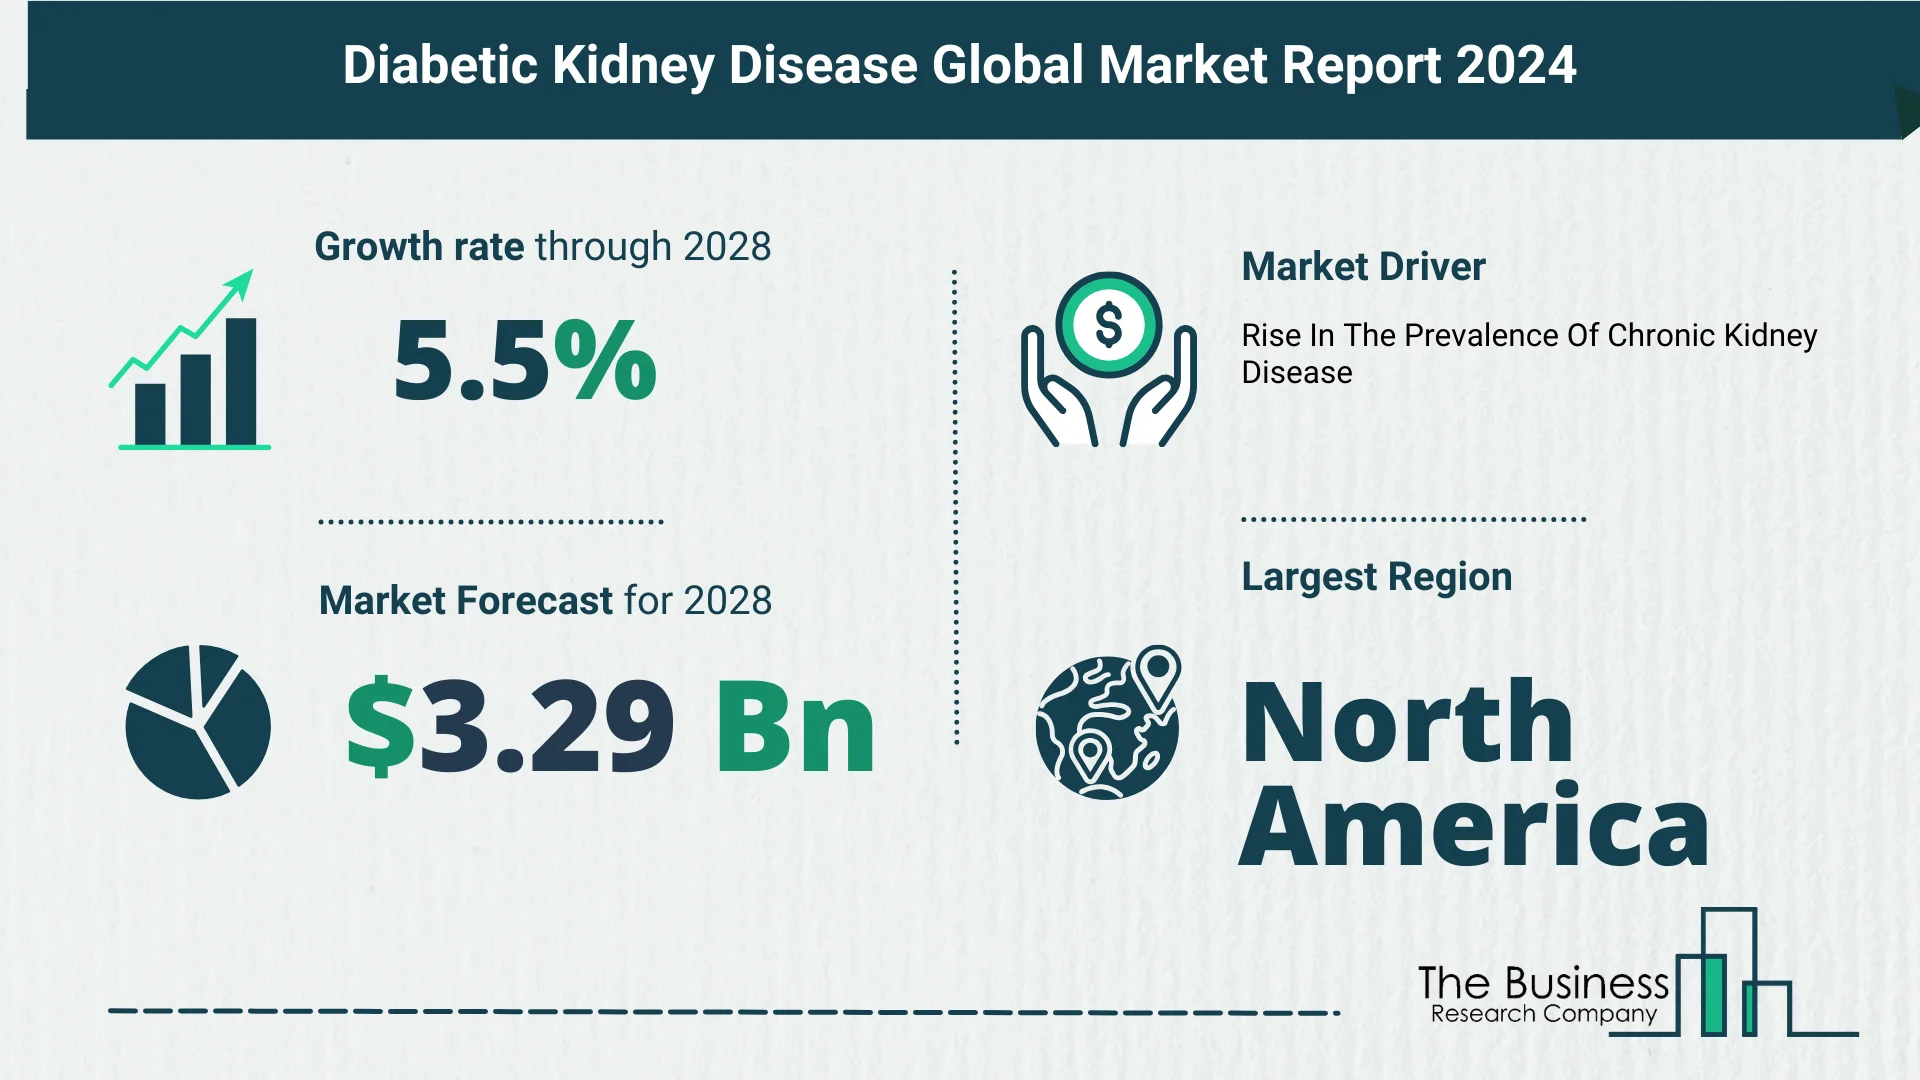 Comprehensive Analysis On Size, Share, And Drivers Of The Diabetic Kidney Disease Market